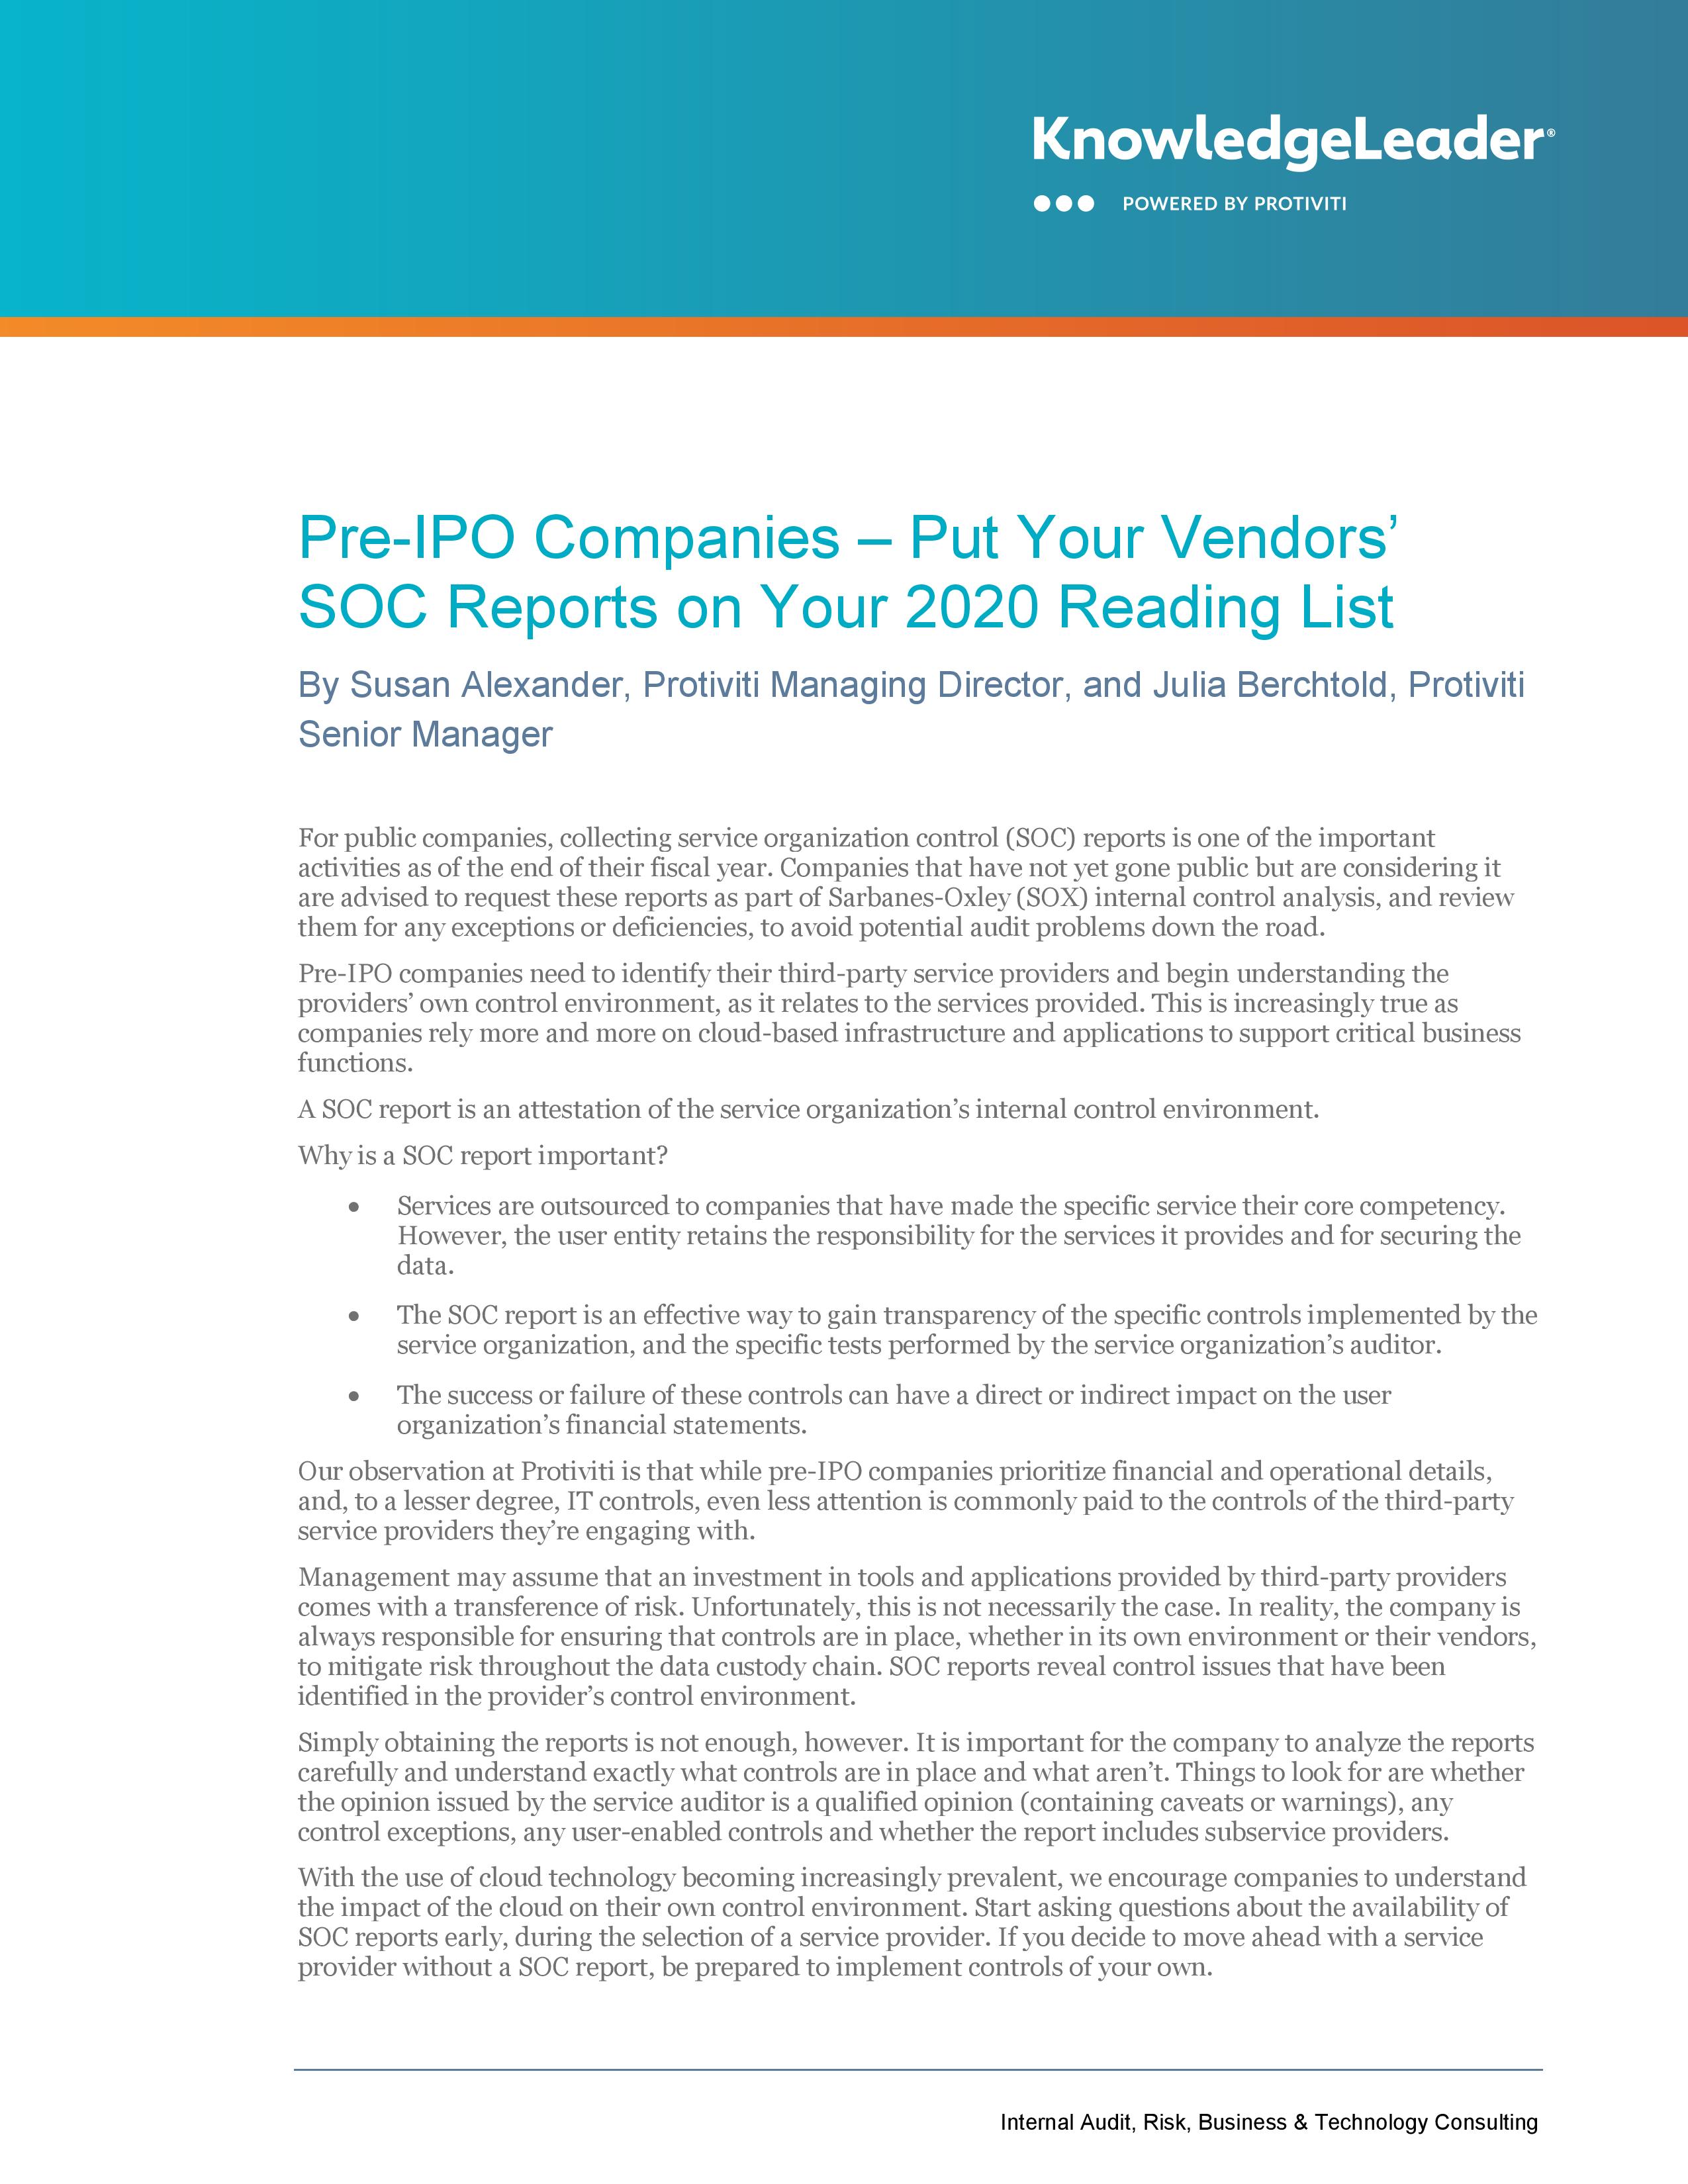 screenshot of the first page of Pre-IPO Companies – Put Your Vendors’ SOC Reports on Your 2020 Reading List